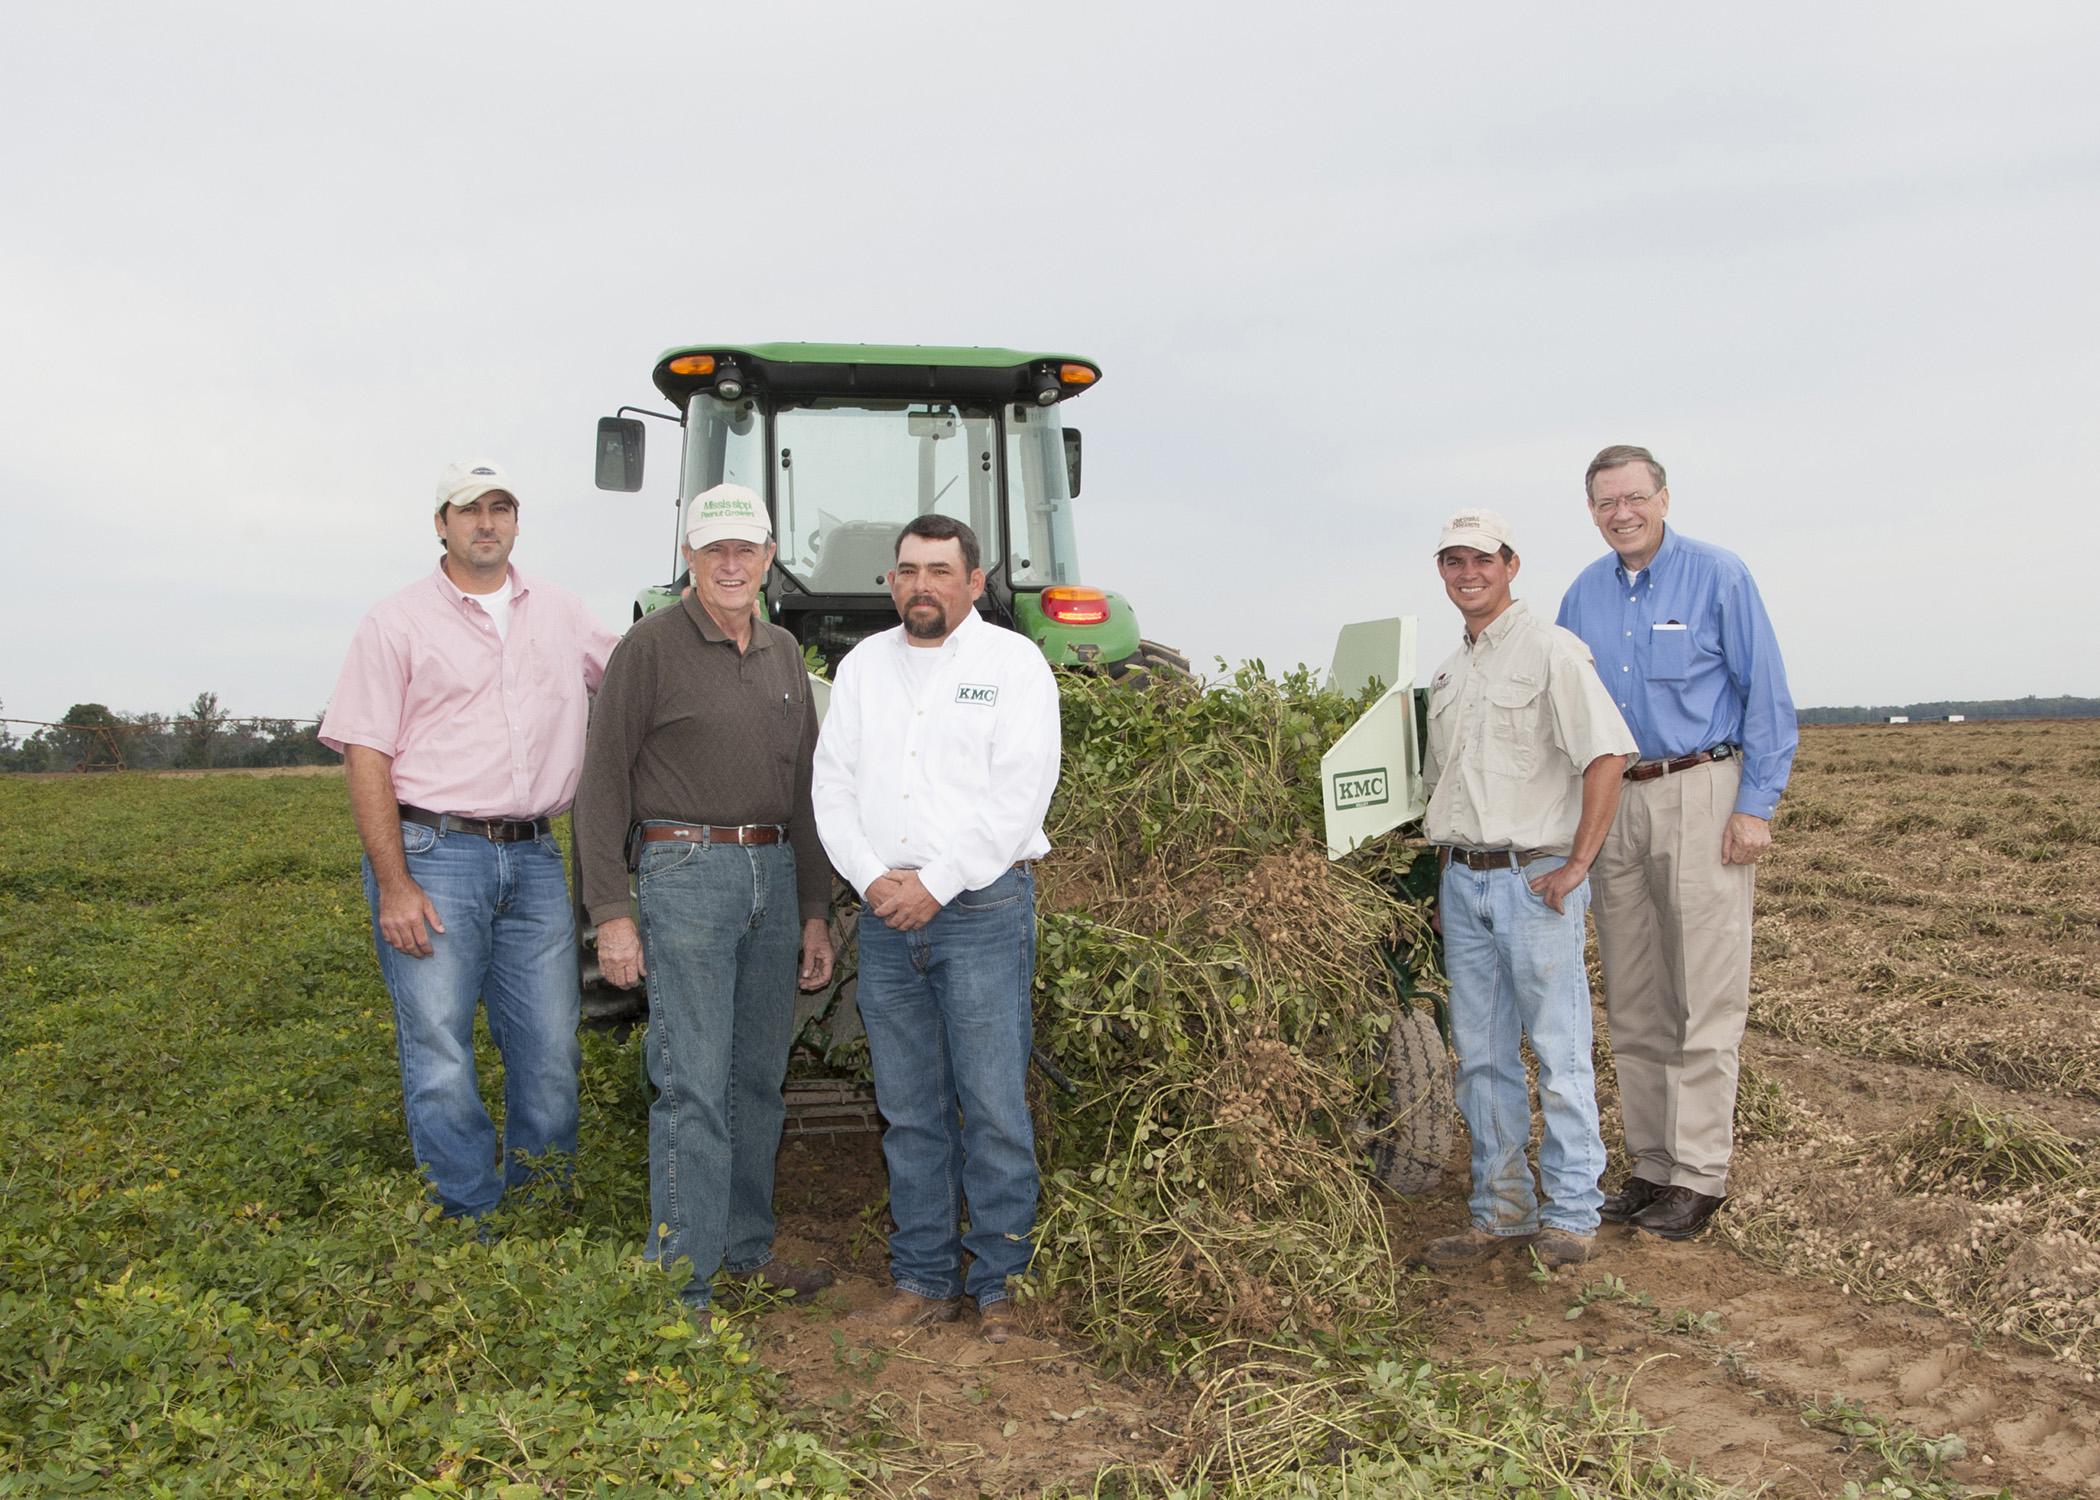 A two-row digger shaker donated to the Mississippi Peanut Growers Association by Kelley Manufacturing Company was demonstrated recently at Parrish Farms in Holmes County. On hand for the demonstration were, from left, Brad Burgess, Mississippi State University’s variety testing director; Malcolm Broome, Mississippi Peanut Growers Association executive director; Keith Weeks, KMC territory manager; Daniel Parrish, MPGA board member; and Reuben Moore, Mississippi Agricultural and Forestry Experiment Station as